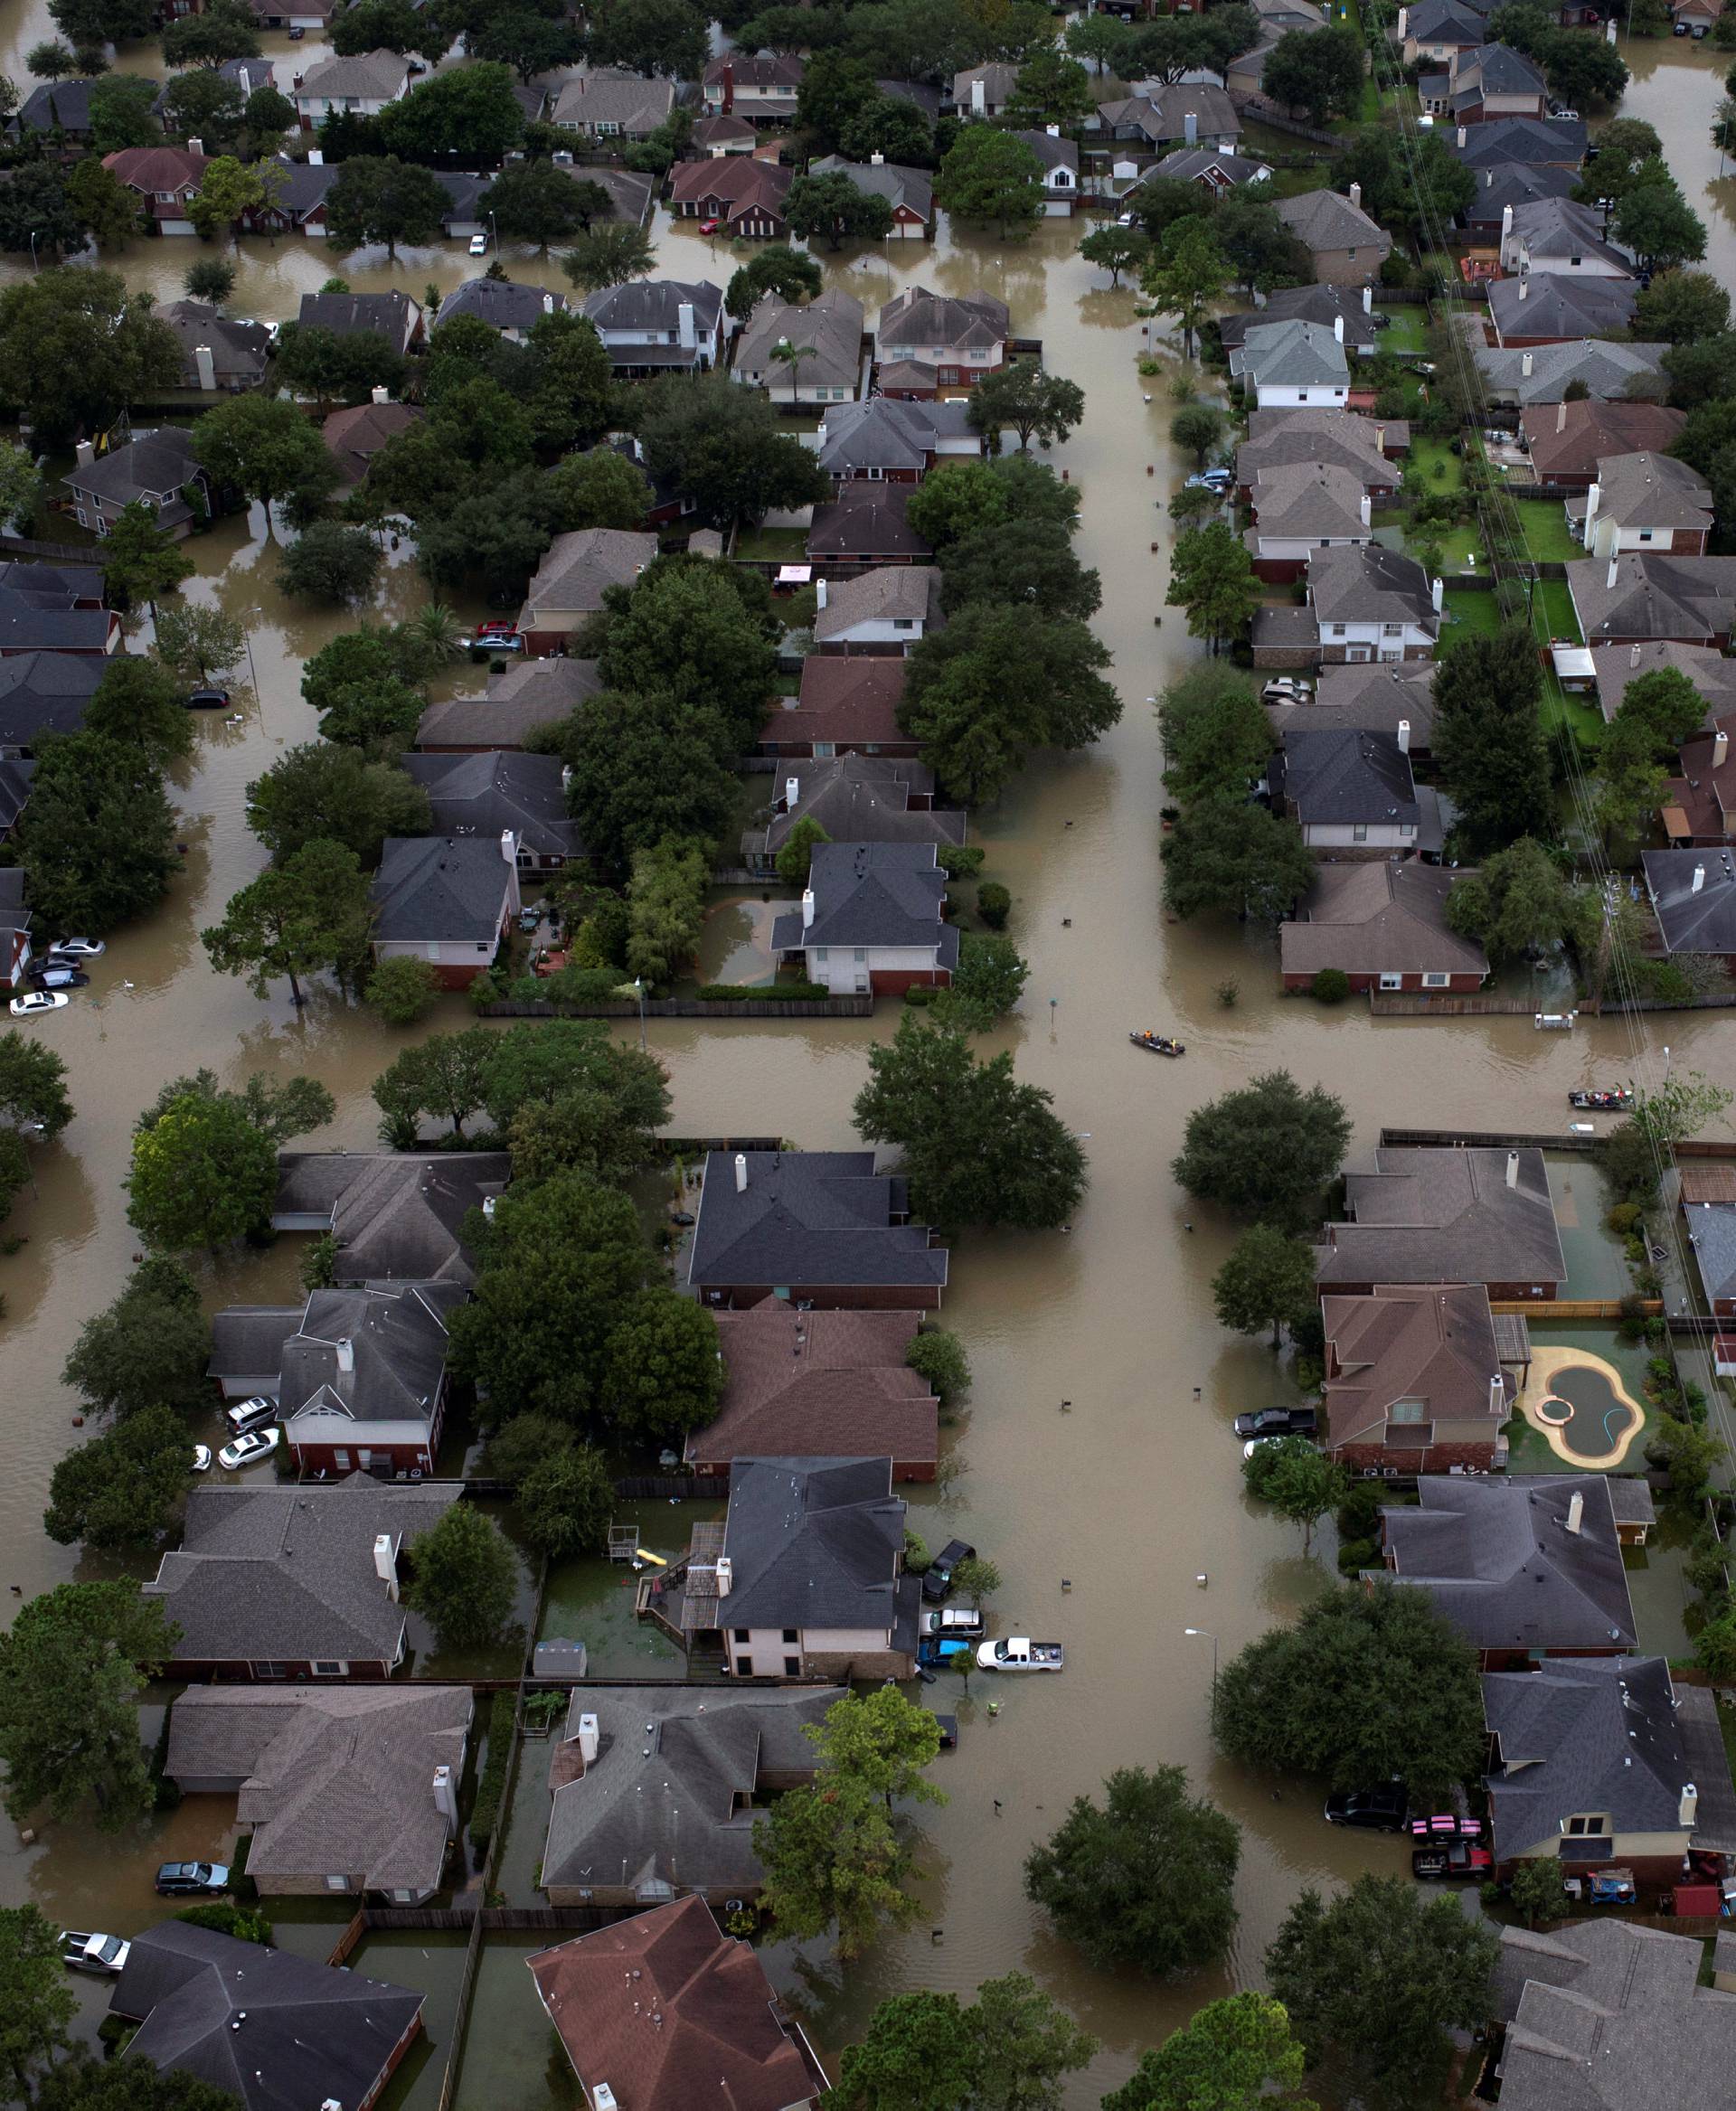 Houses are seen submerged in flood waters caused by Tropical Storm Harvey in Houston